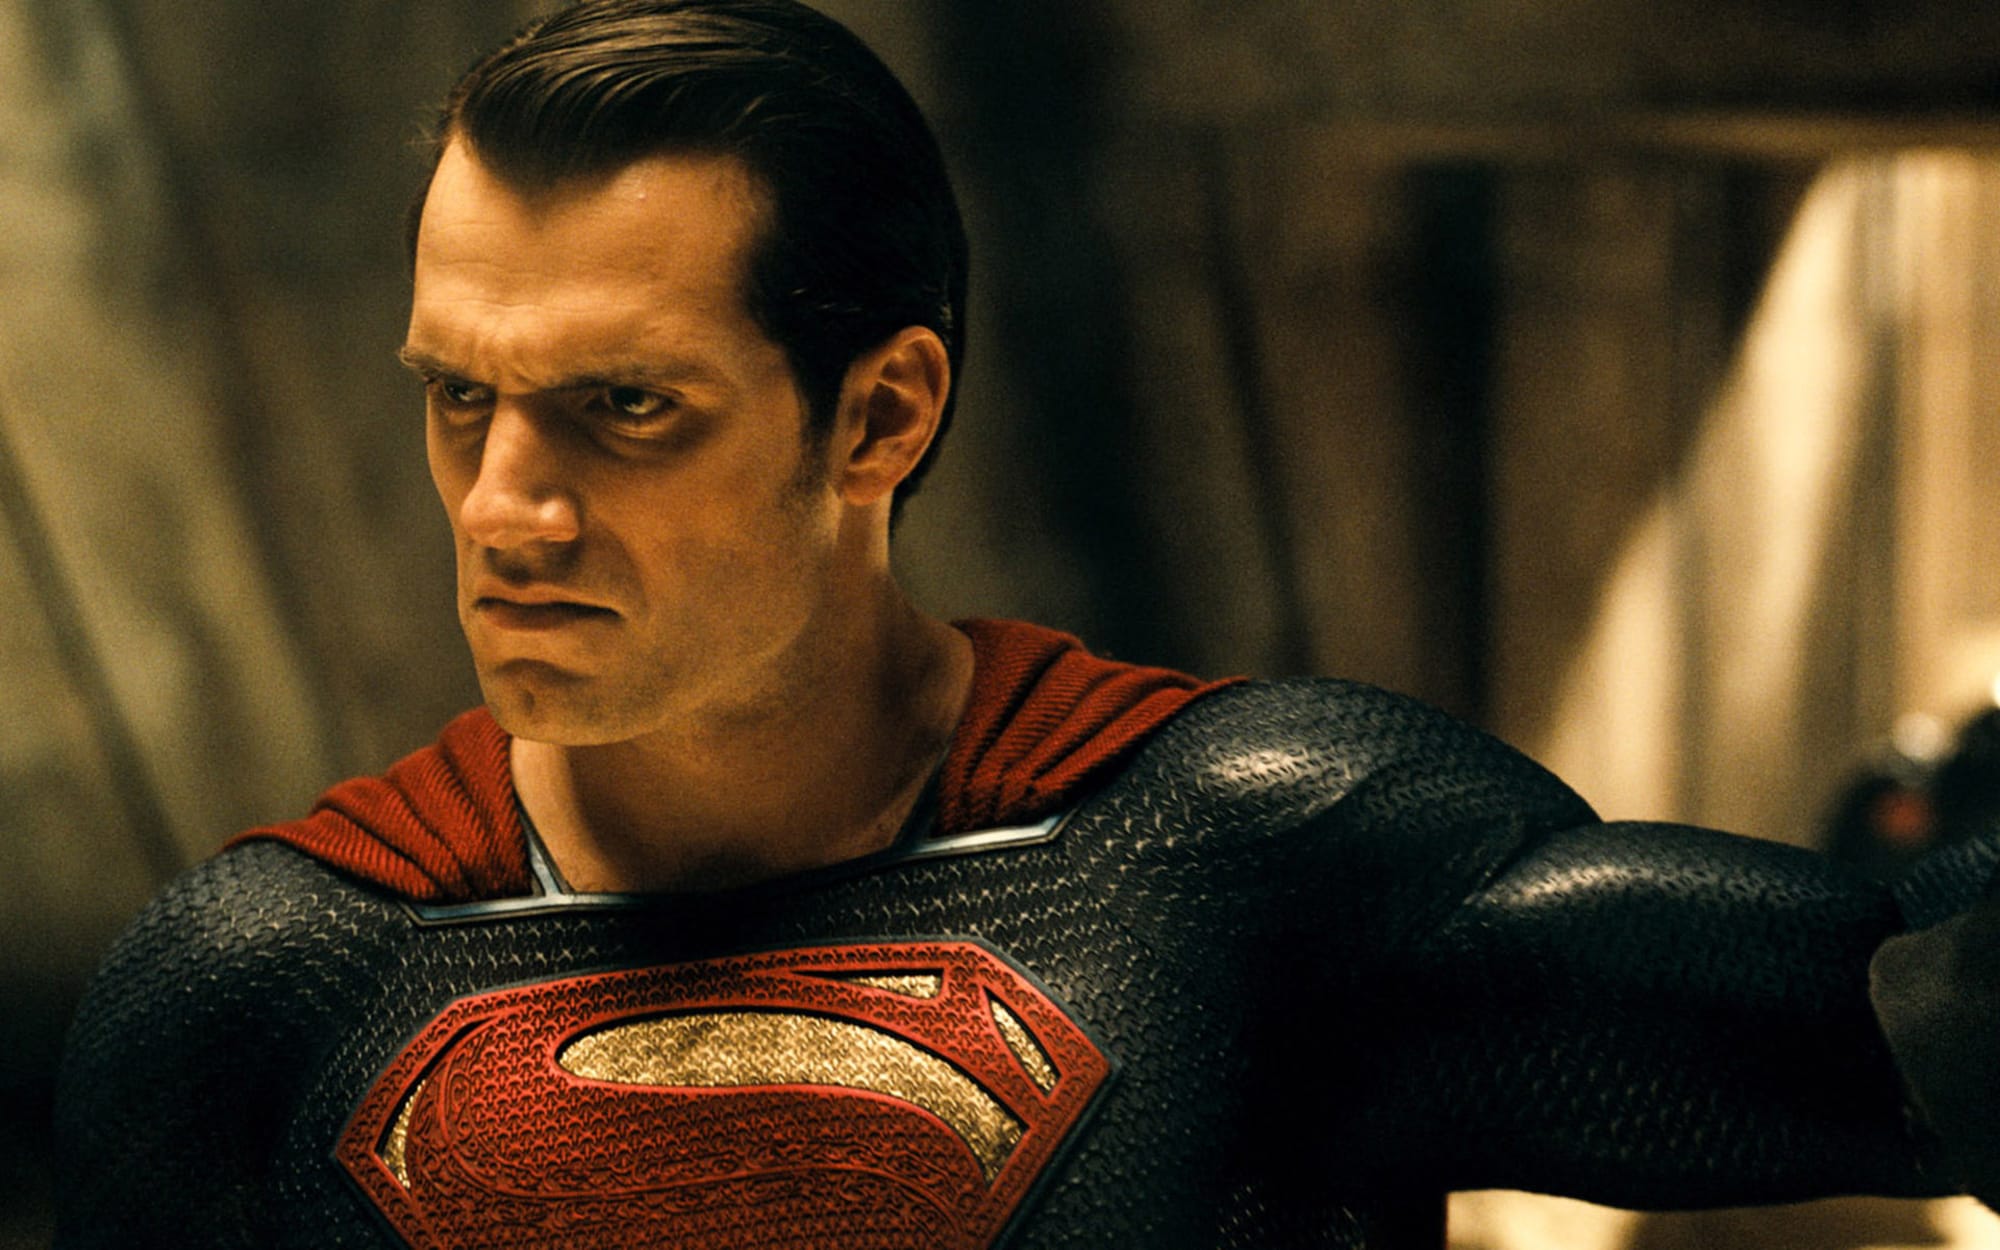 Henry Cavill is officially back as Superman